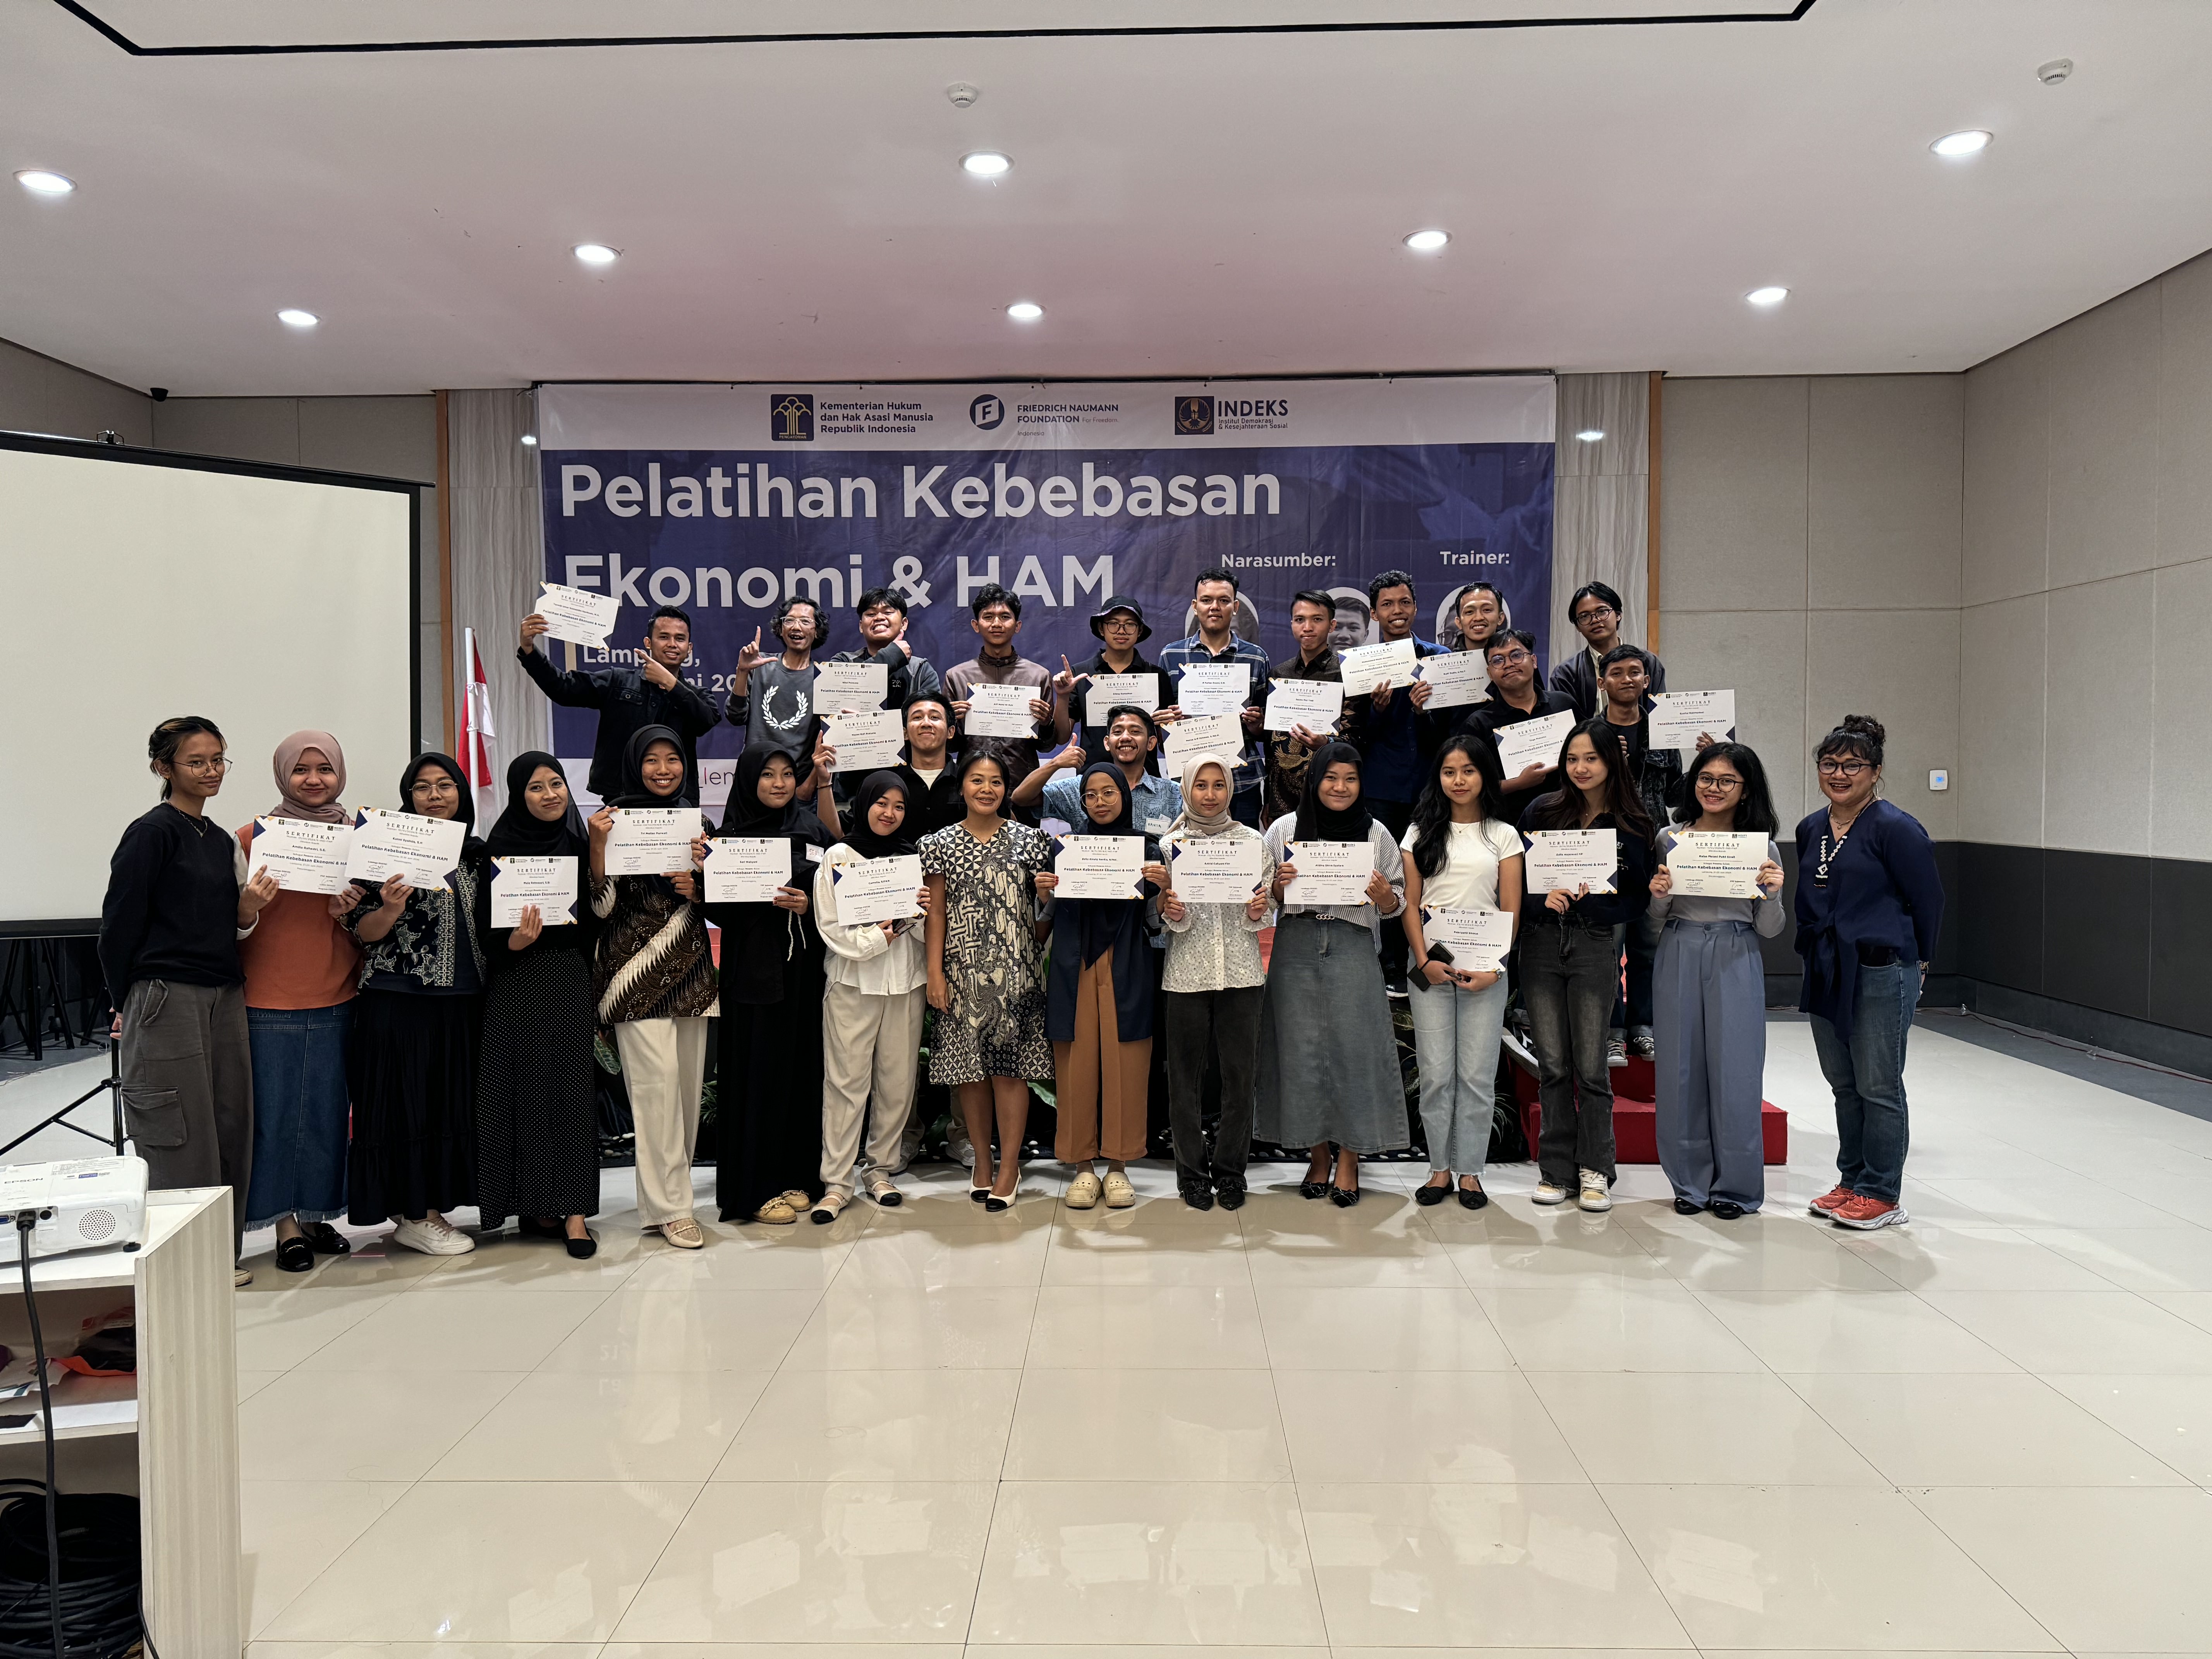 Participants of the event standing alongside Ganes Woro Retnani, Program Officer of FNF Indonesia, in front of a banner showing the event's details.